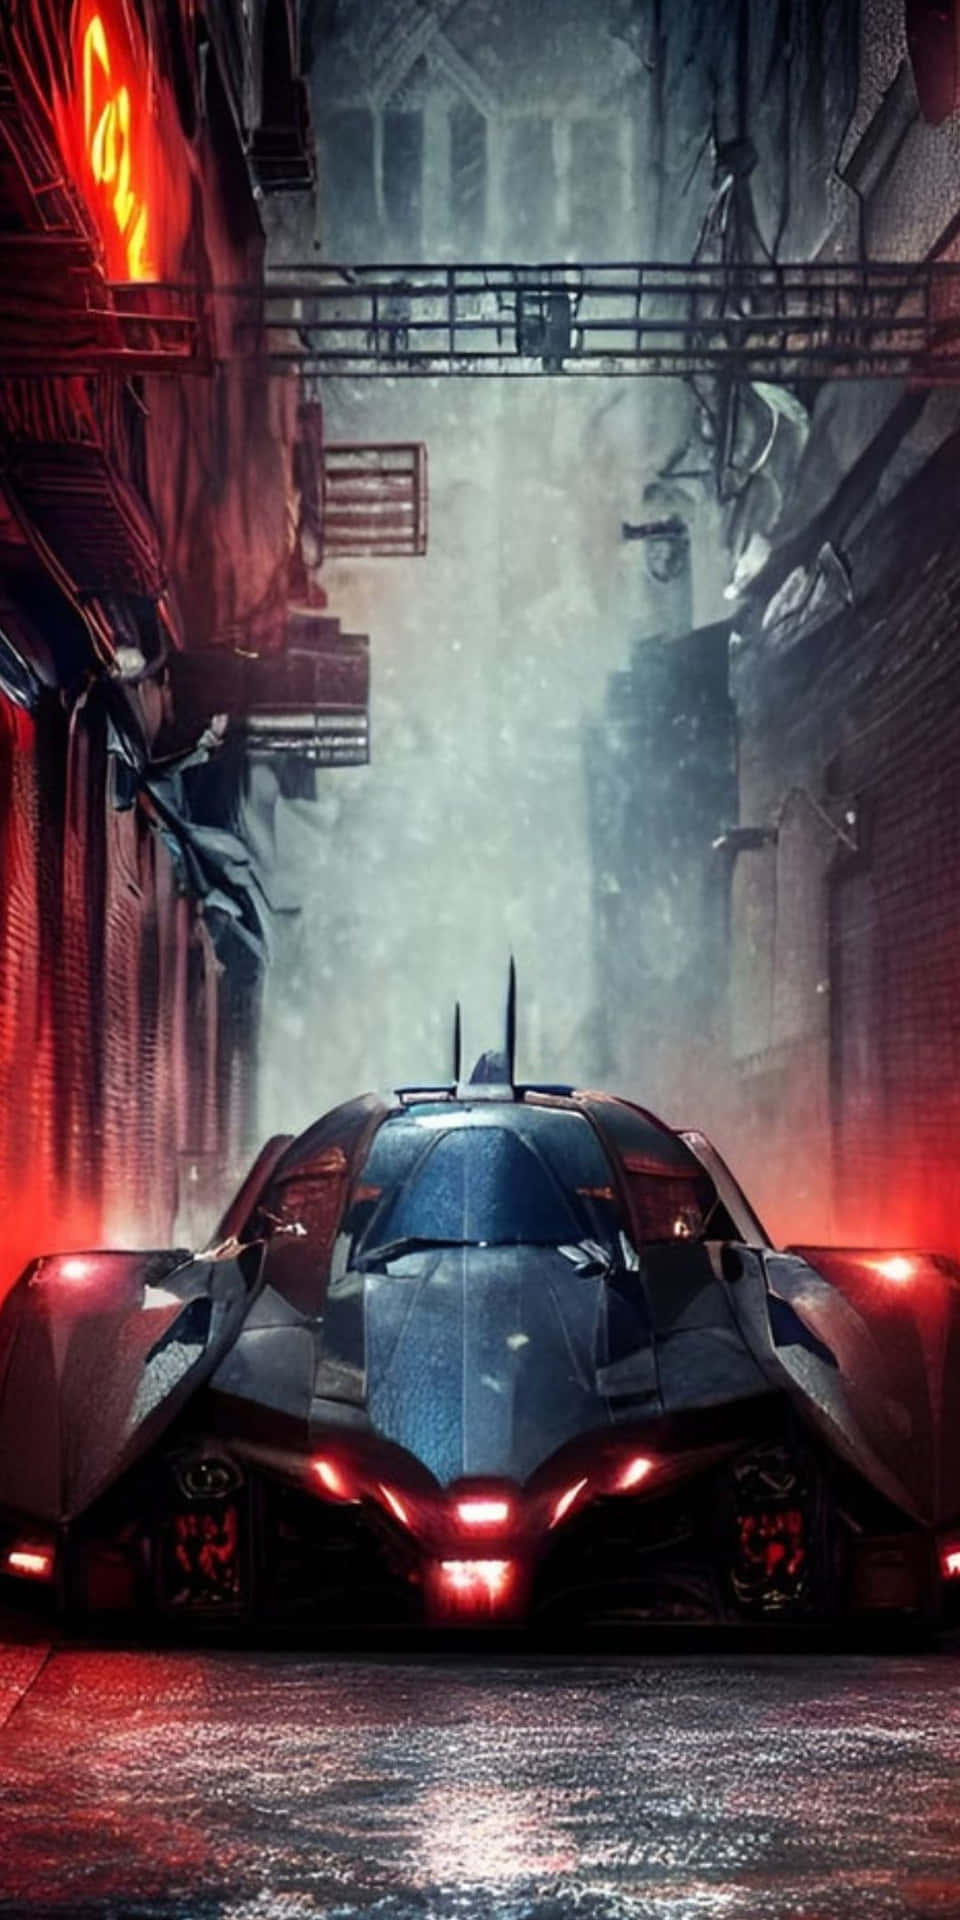 Experience the Flytech of the Dark Knight's Batmobile with the Power of Google Pixel 3